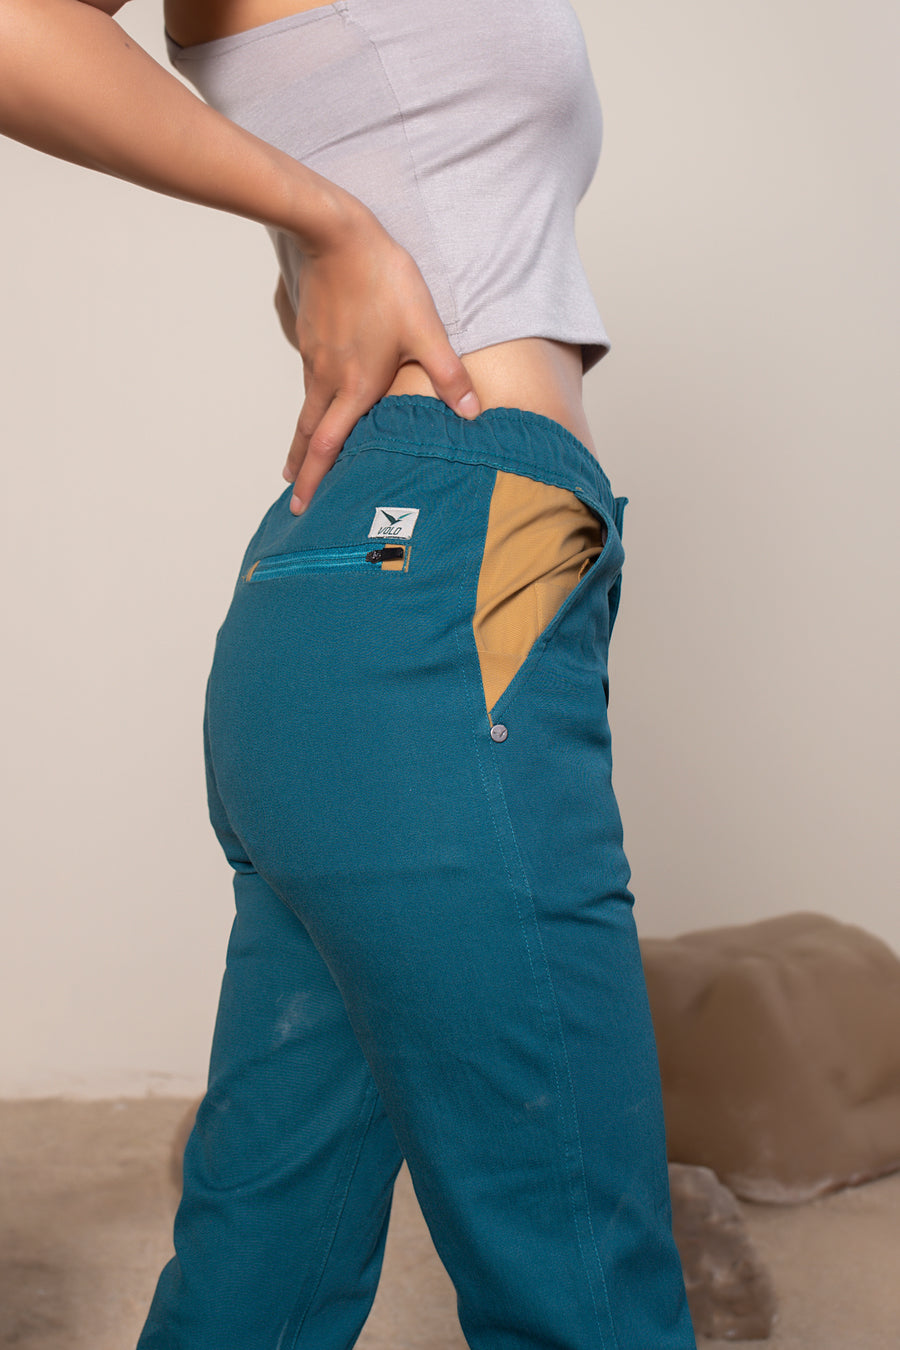 Women's Sequoia Canvas Pant in Teal | VOLO Apparel | Made with an ultra durable stretch cotton canvas, the Sequoia Canvas Pant is our ultimate six pocket lifestyle pant. Featuring a modern slim fit and a 33 inch inseam, a 3 point gusset, snap button security pockets, 2 zipper pockets and the comfort of durable canvas, these are your go to adventure pants that can handle anything you throw at them.